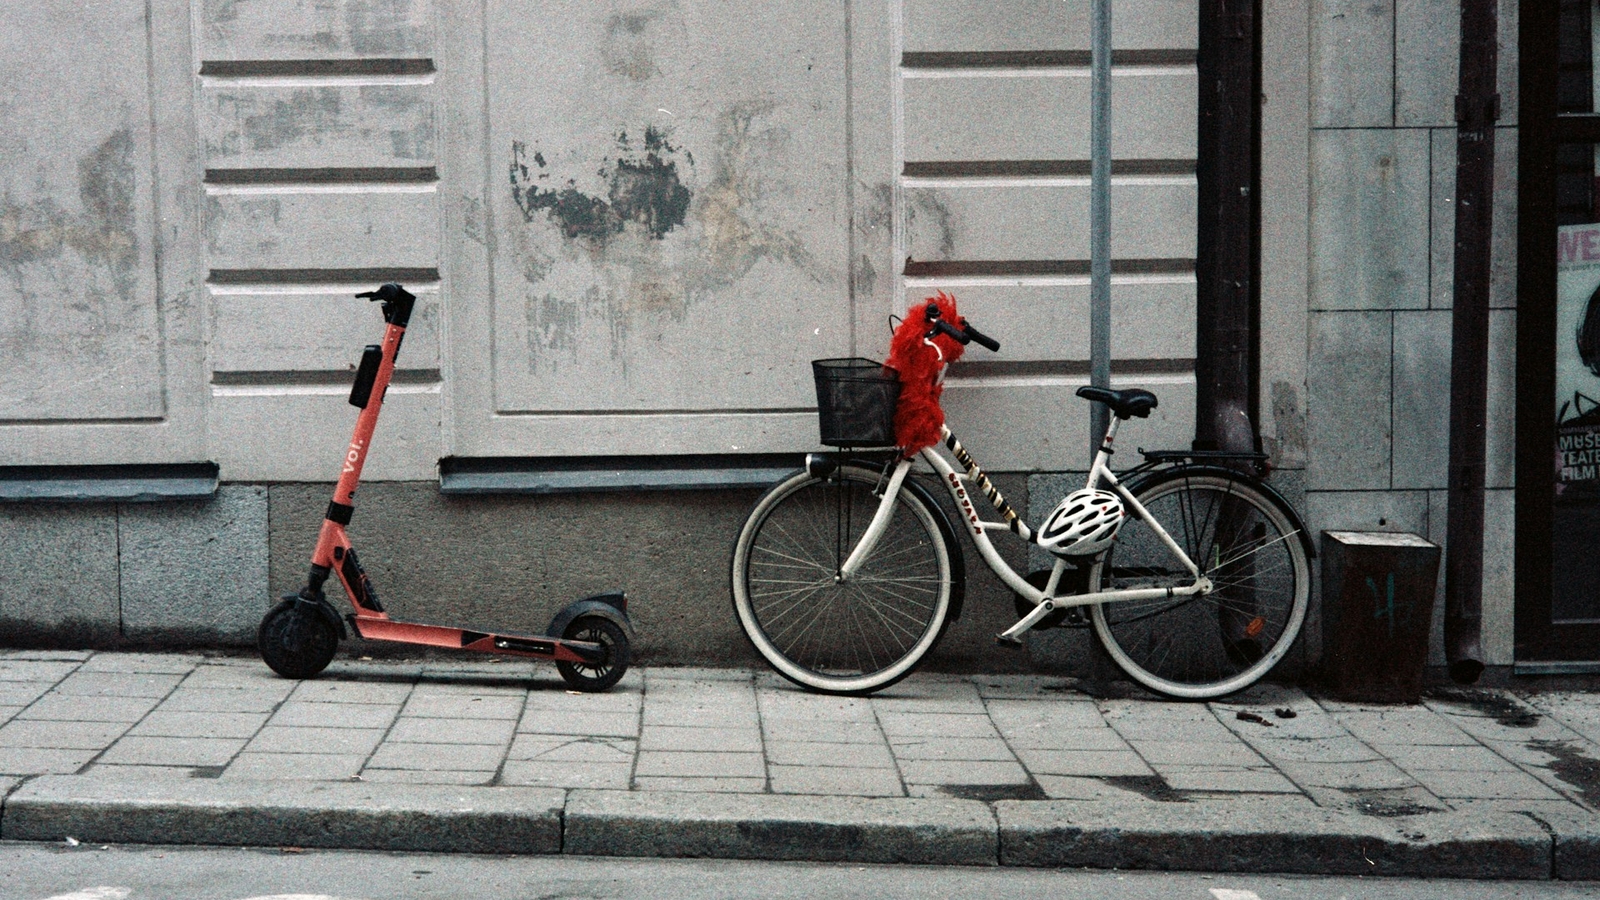 A red electric scooter and a white bicycle with a basket and a red feathered decoration parked side by side on a city sidewalk.